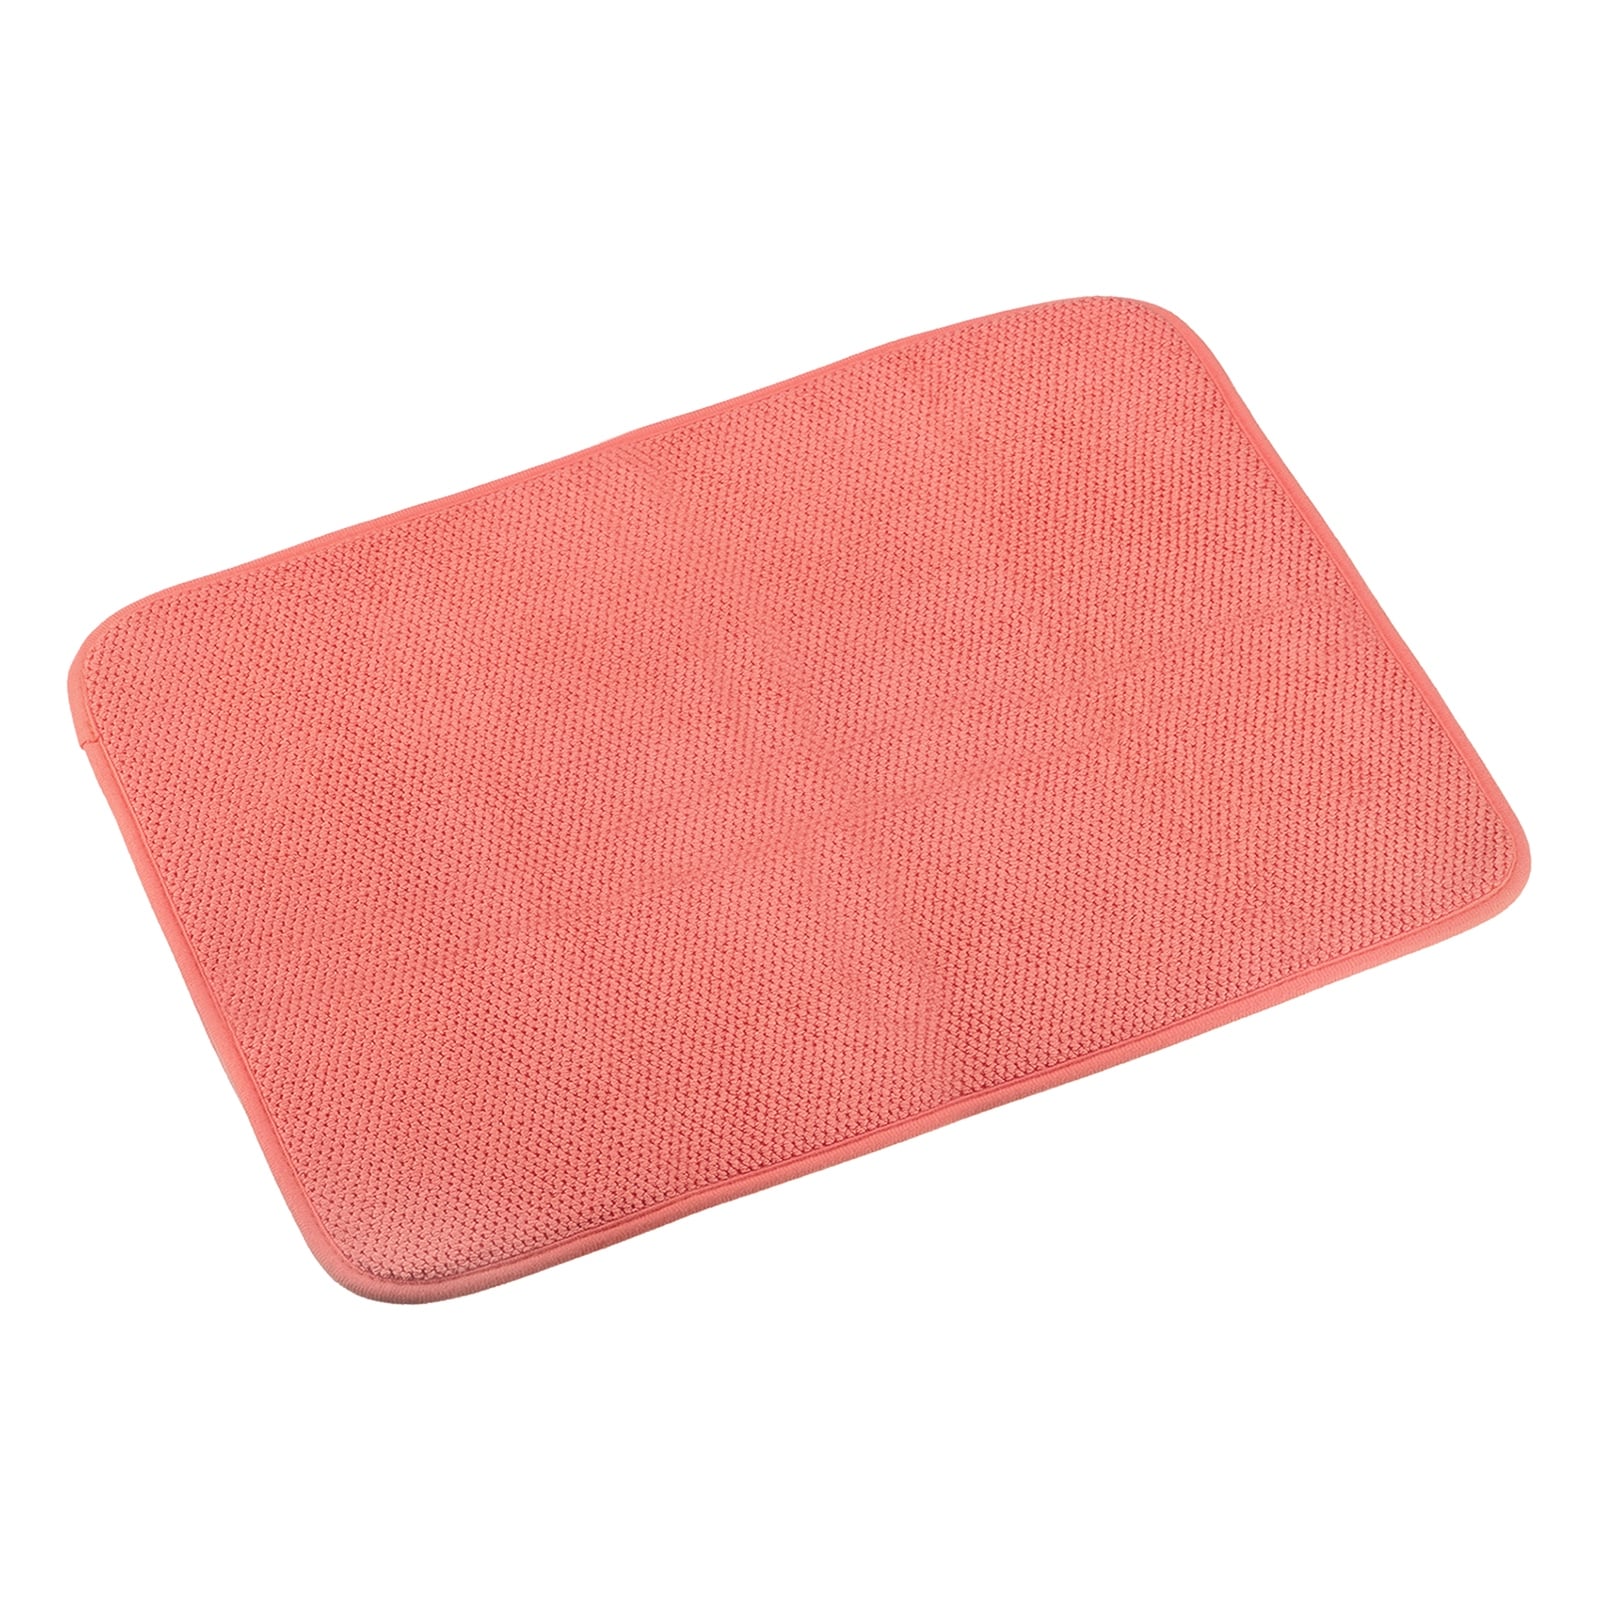 https://ak1.ostkcdn.com/images/products/is/images/direct/e01e8a6af70b8ab39ee1573b88a57b71960e8f10/Microfiber-Dish-Drying-Mat-Kitchen-Sink-Drainer-Tea-Towel-Red.jpg